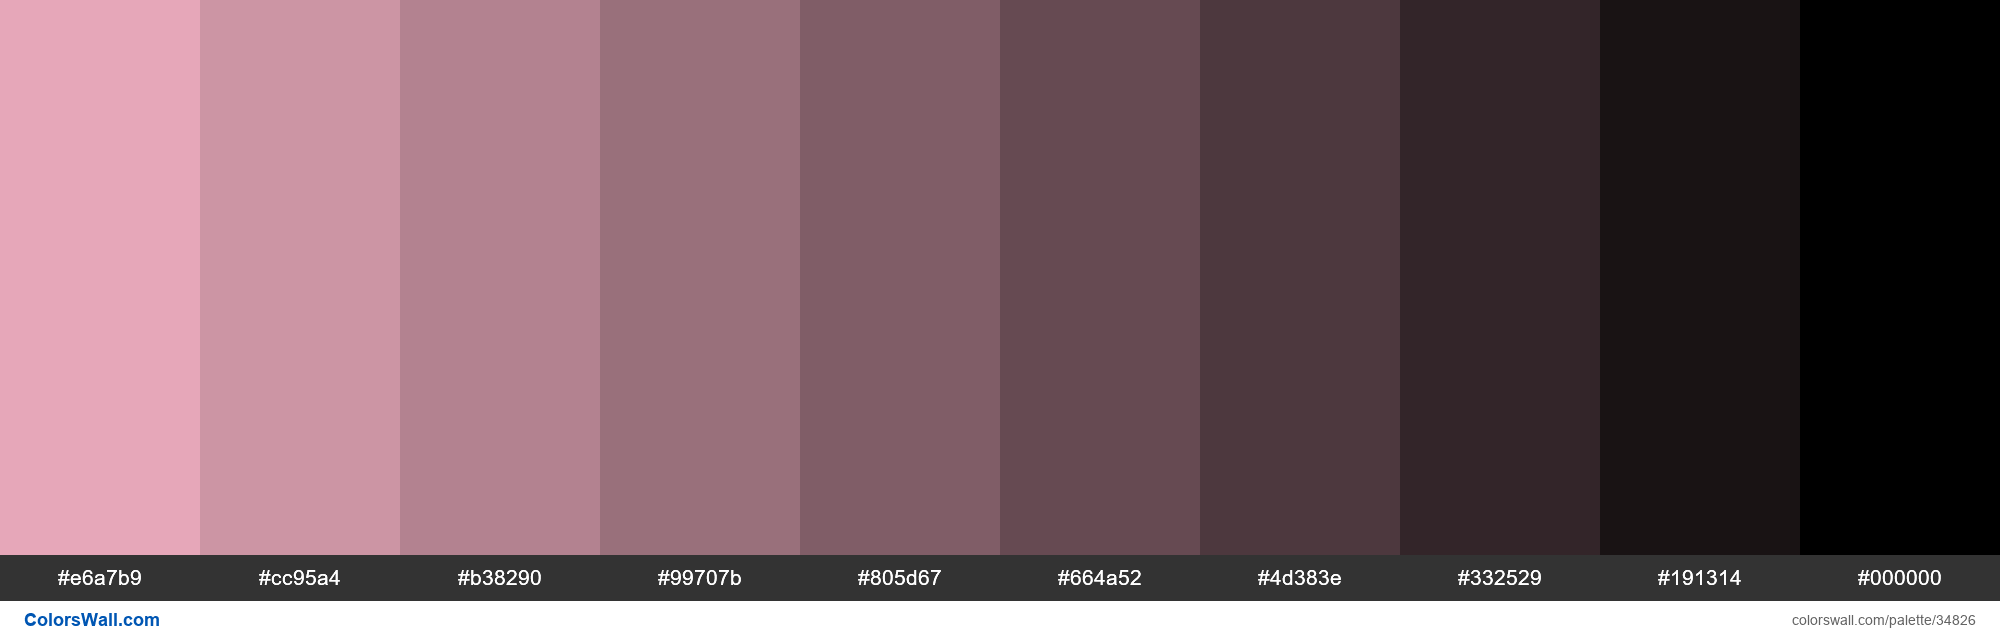 Shades Xkcd Color Pastel Pink Ffbacd Hex Hex Rgb Codes